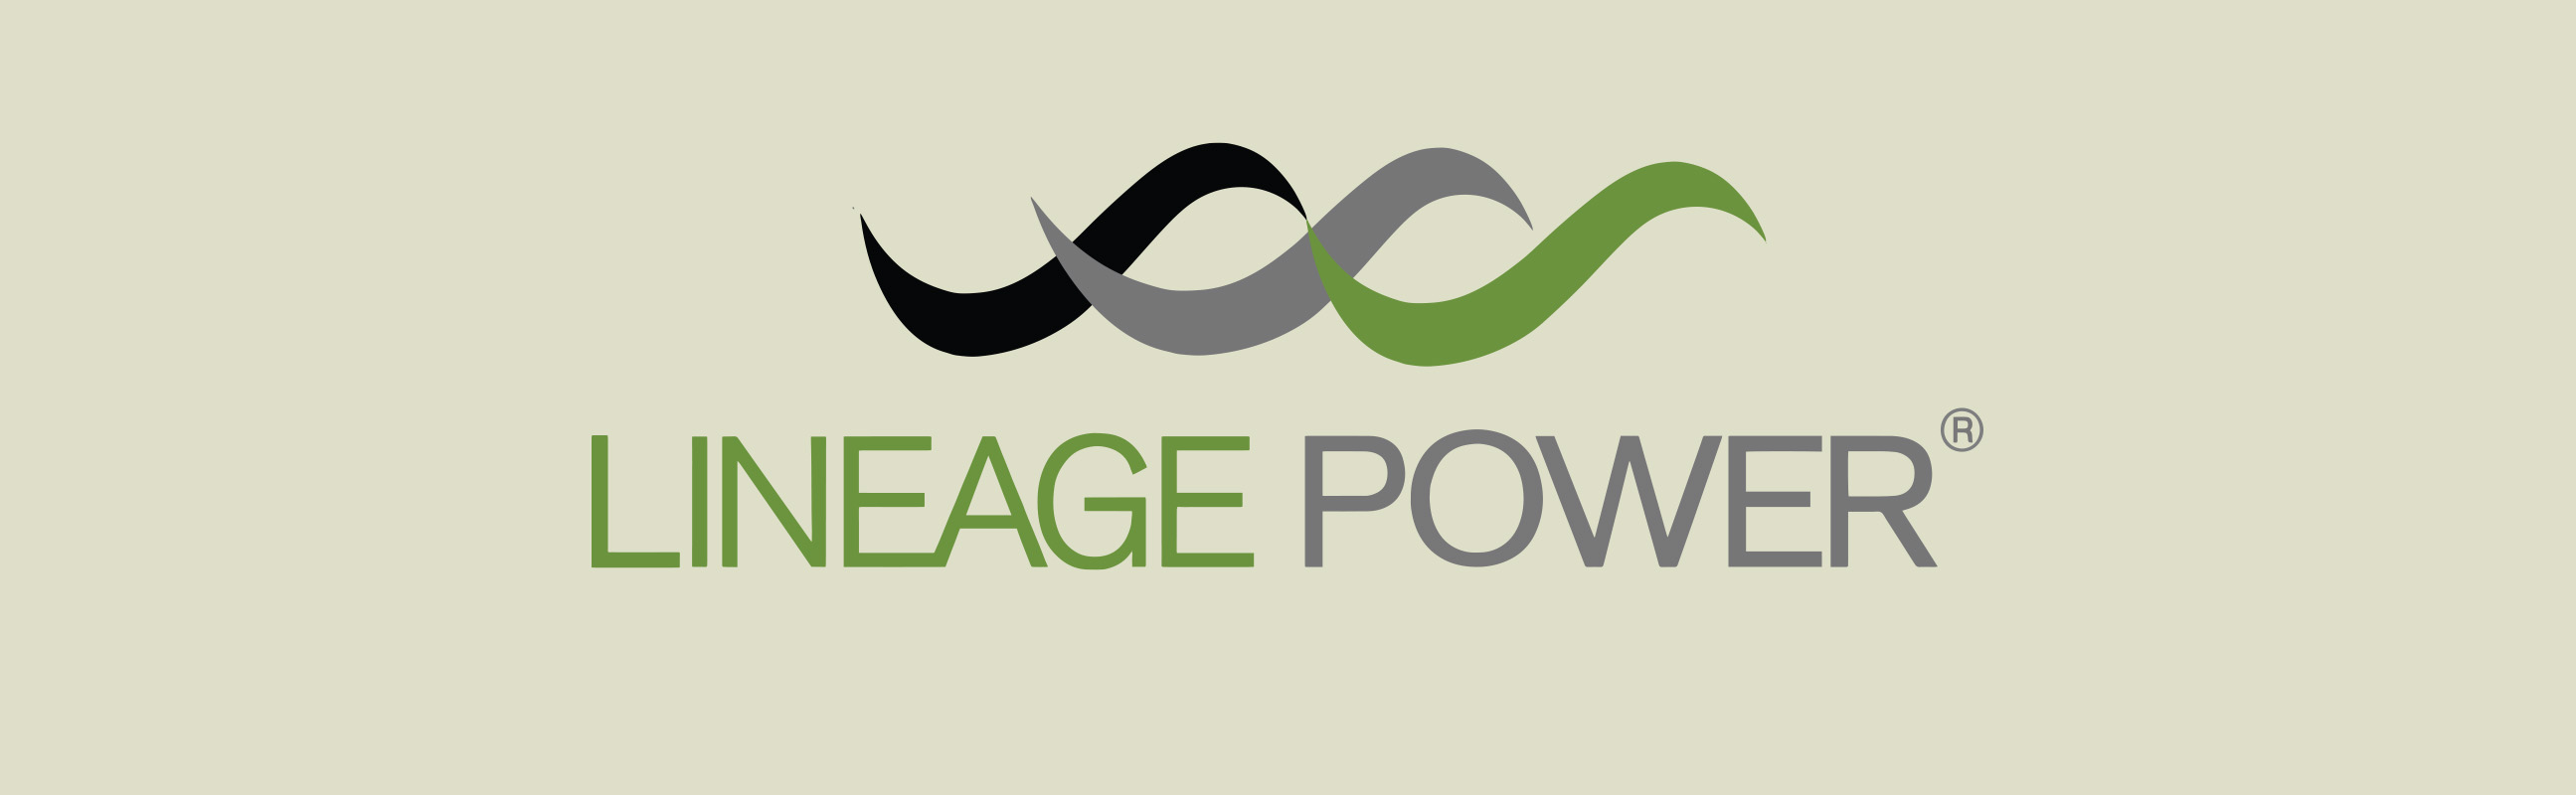 Pace Power buys GE Power business